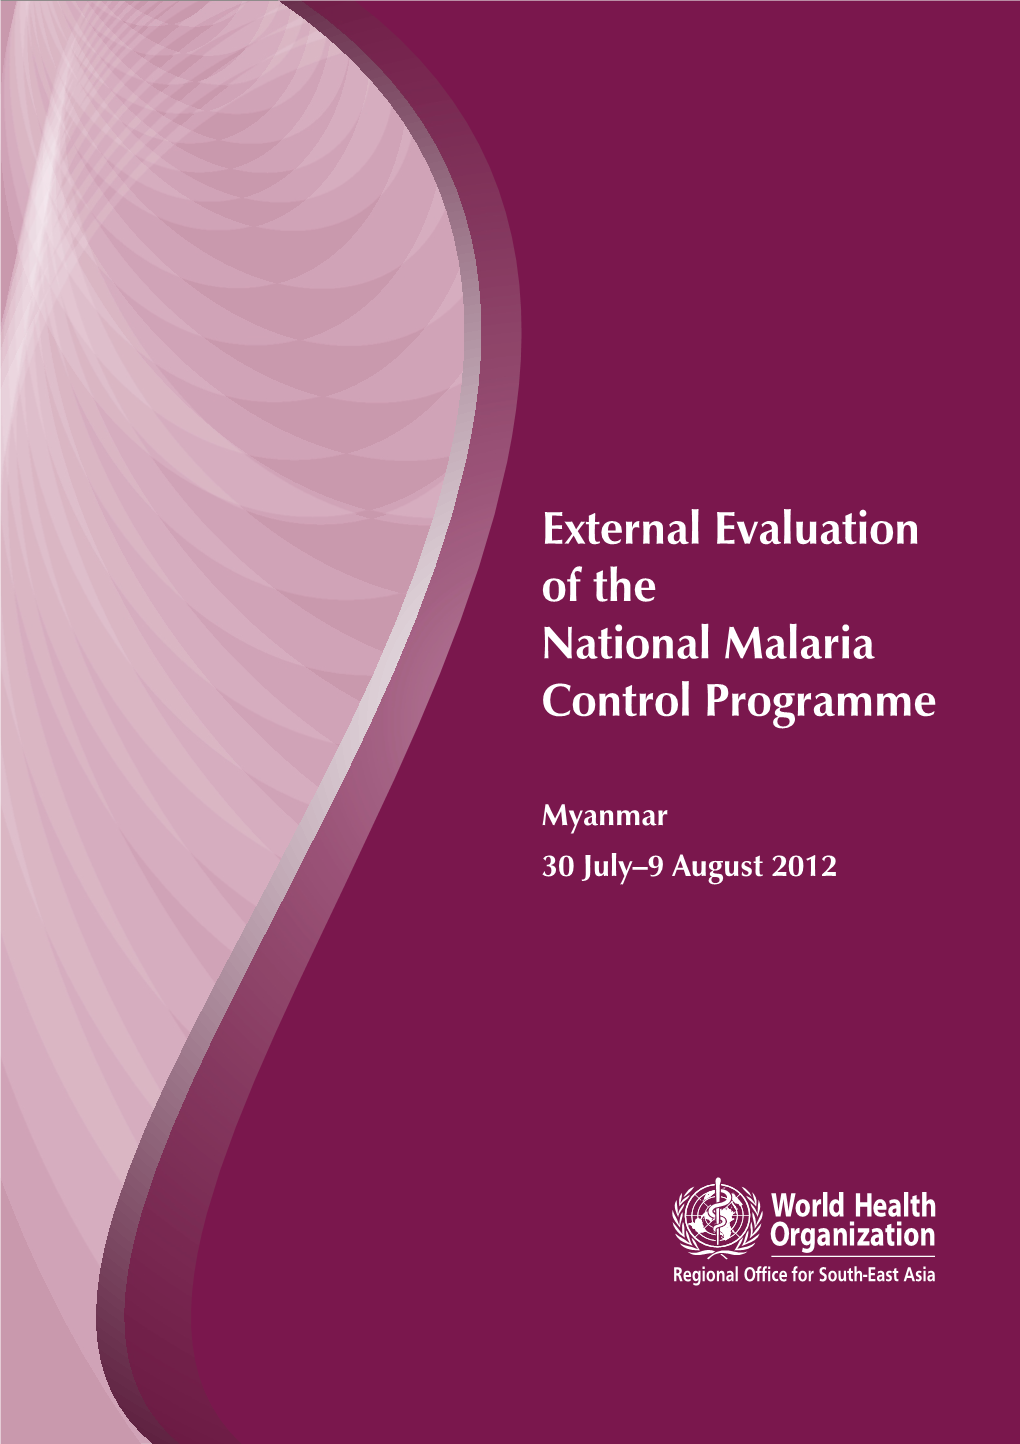 External Evaluation of the National Malaria Control Programme